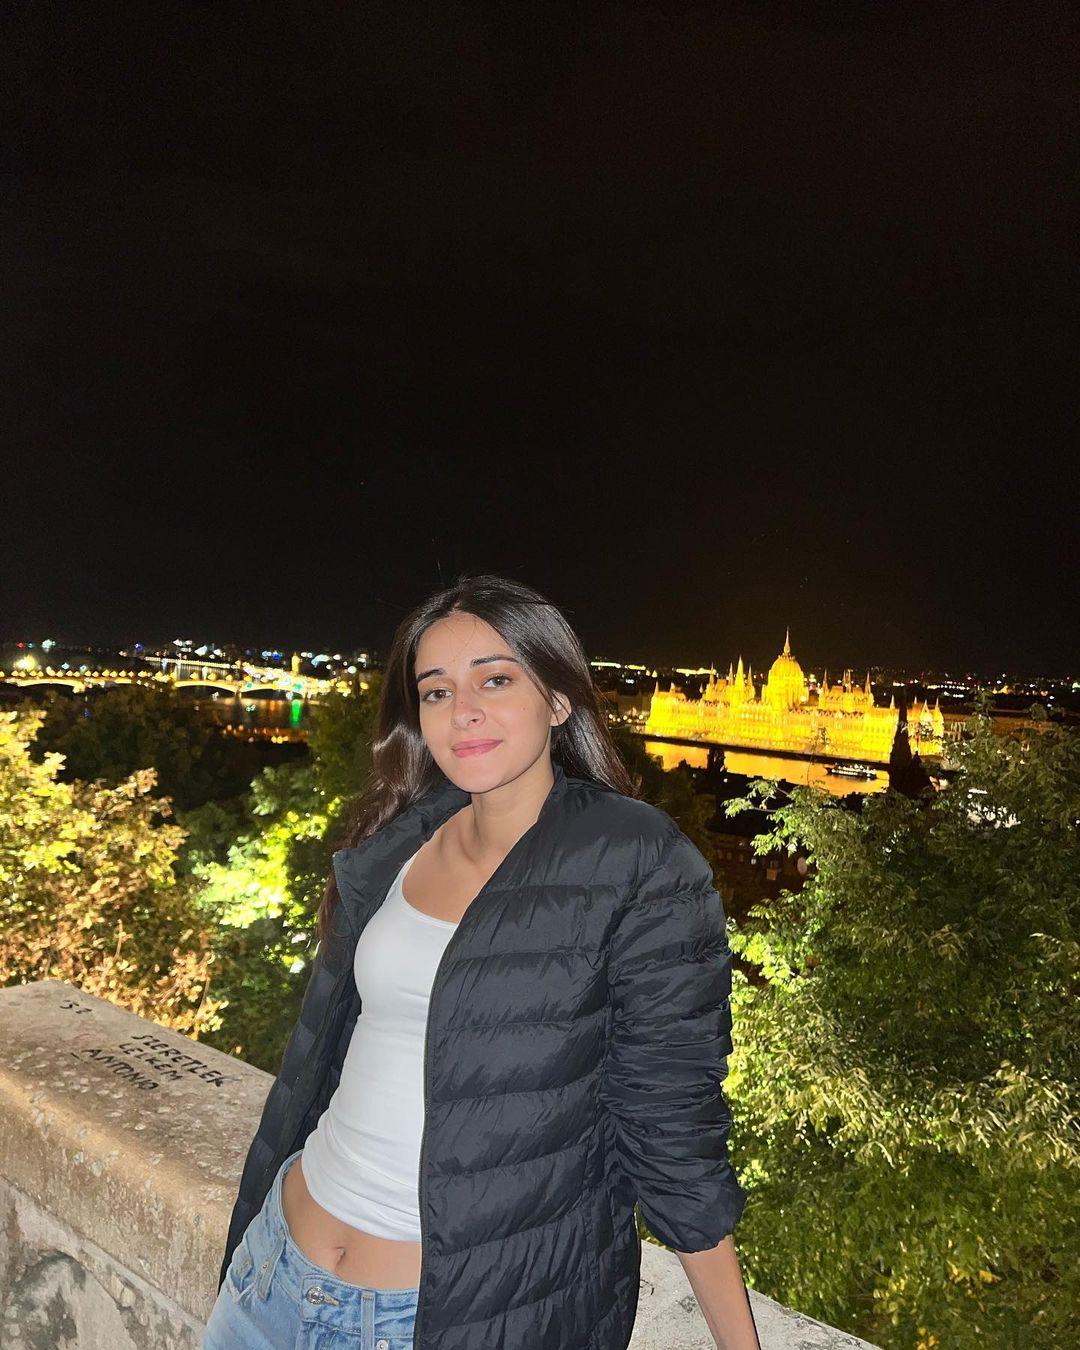 She often posts her travel exploits from various countries, most recently in Budapest